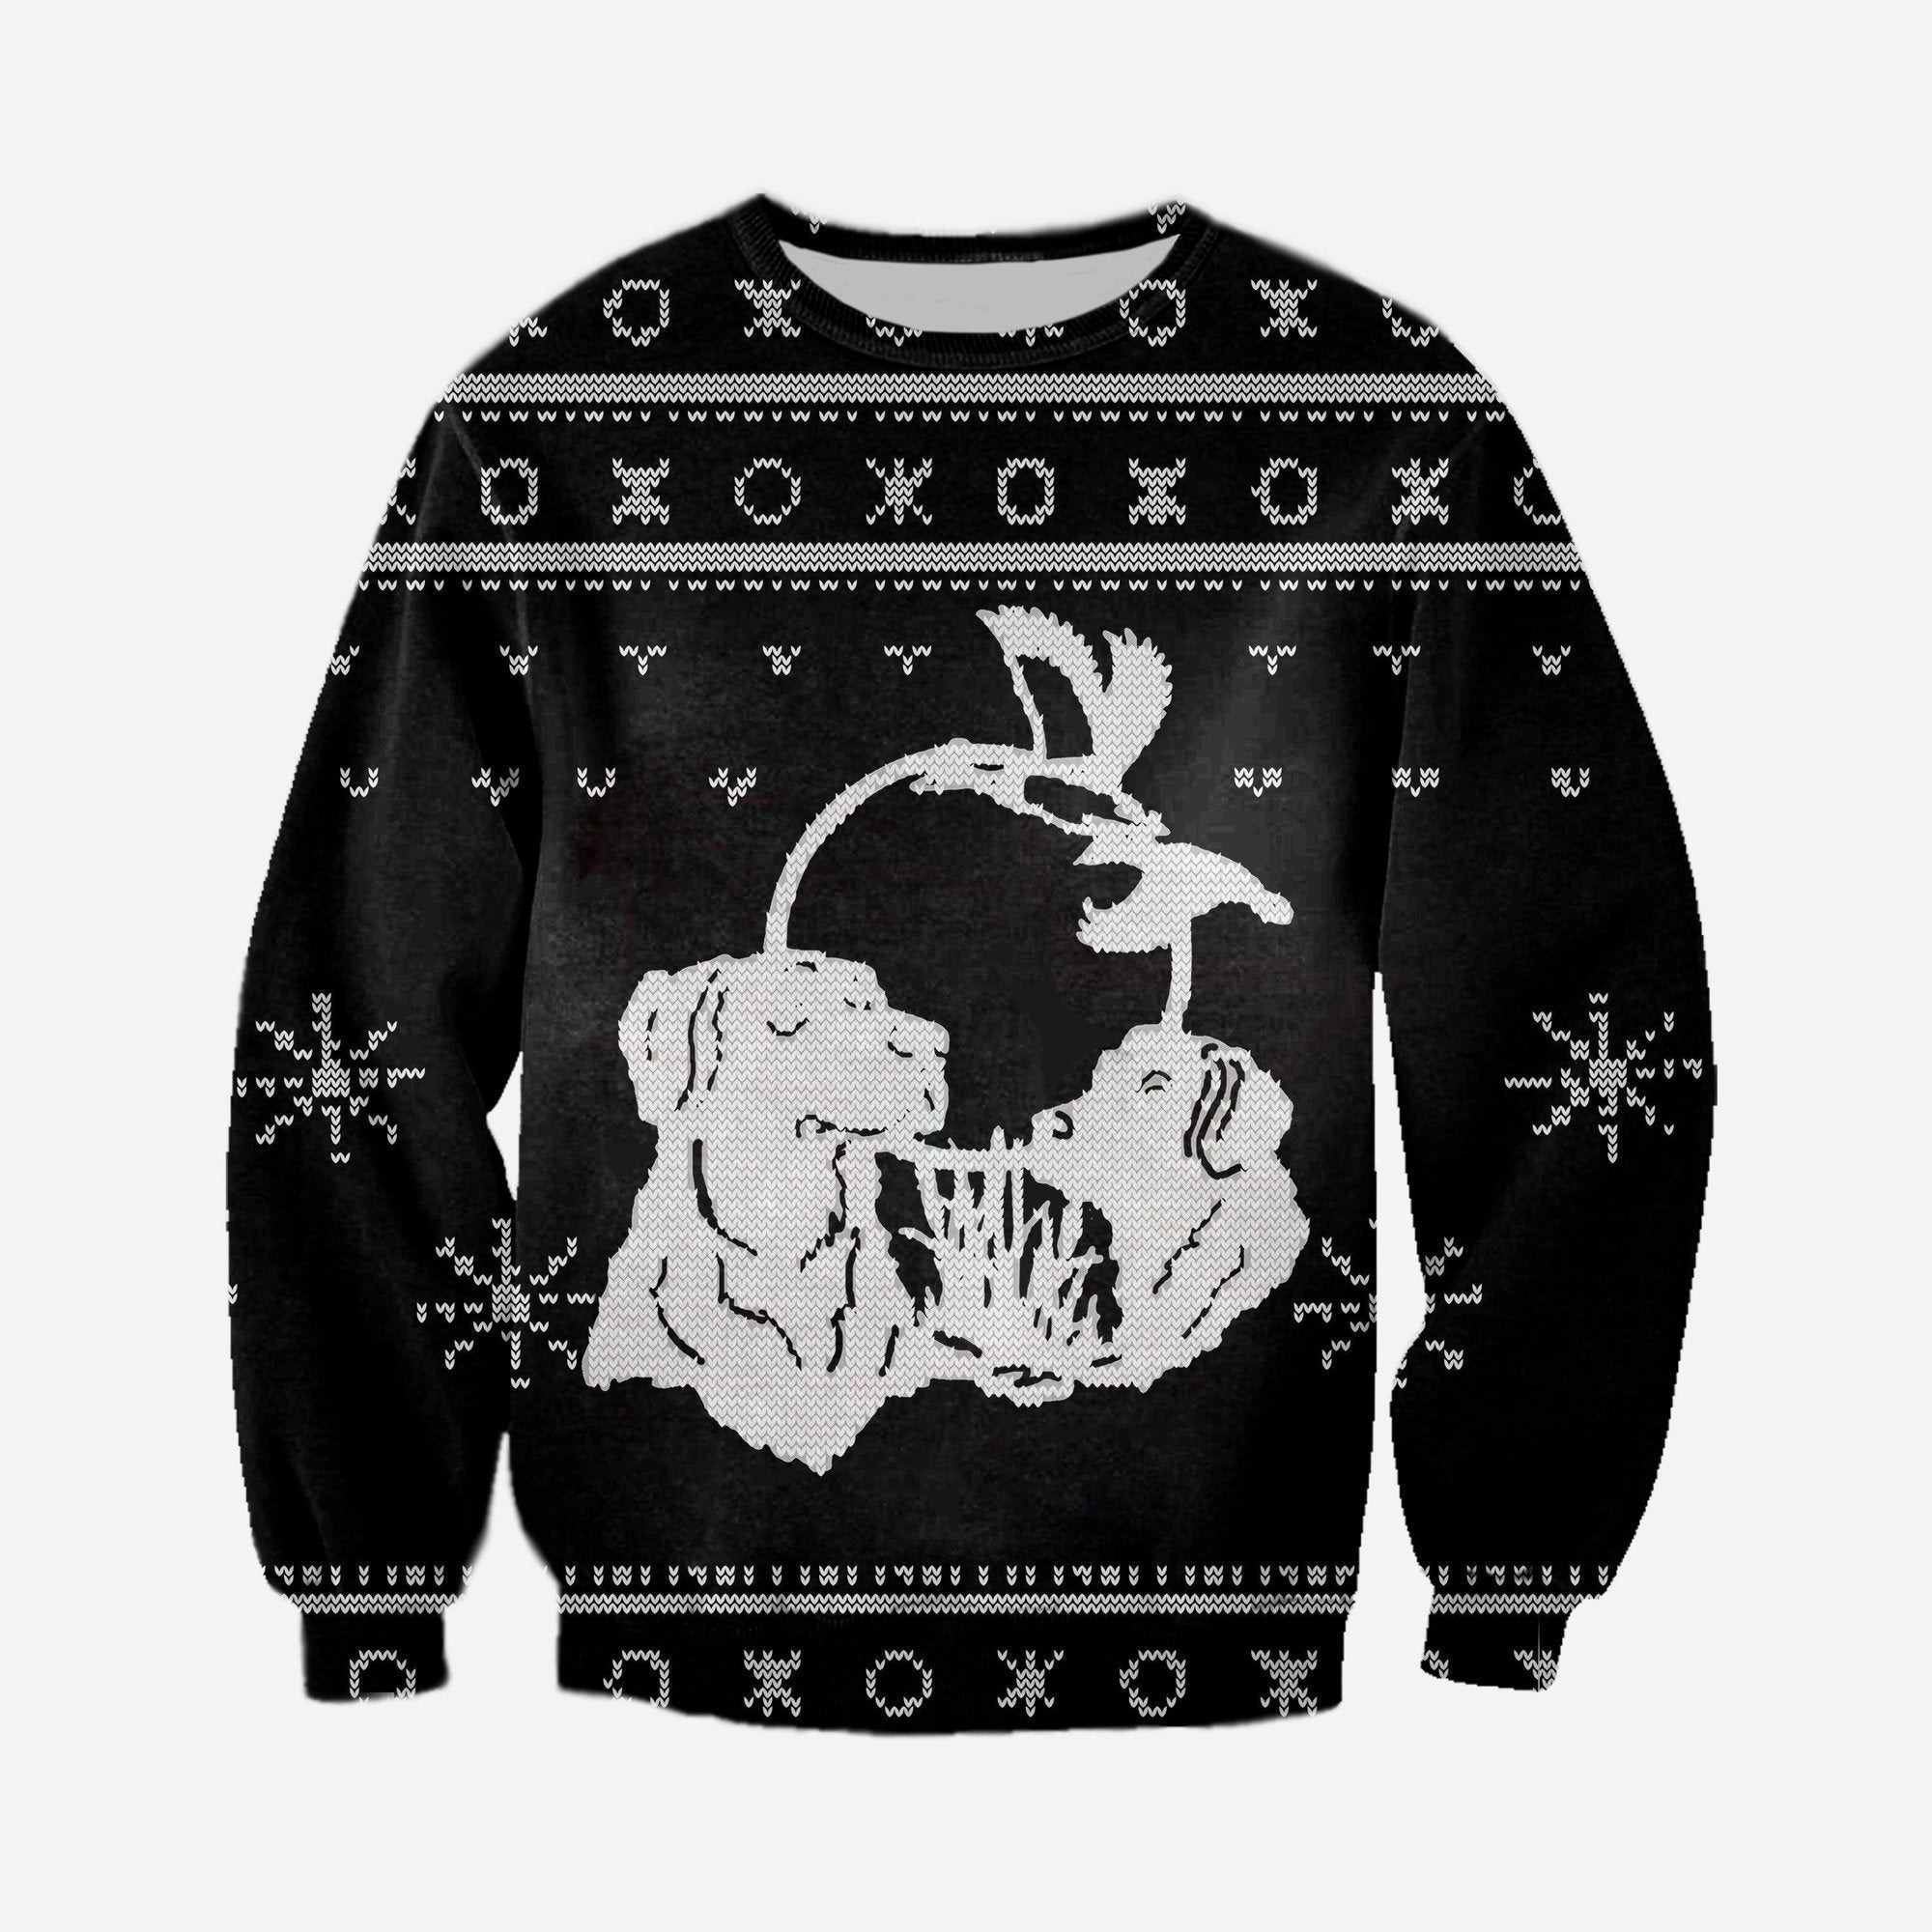 Hunting Ugly Christmas Sweater Ugly Sweater For Men Women